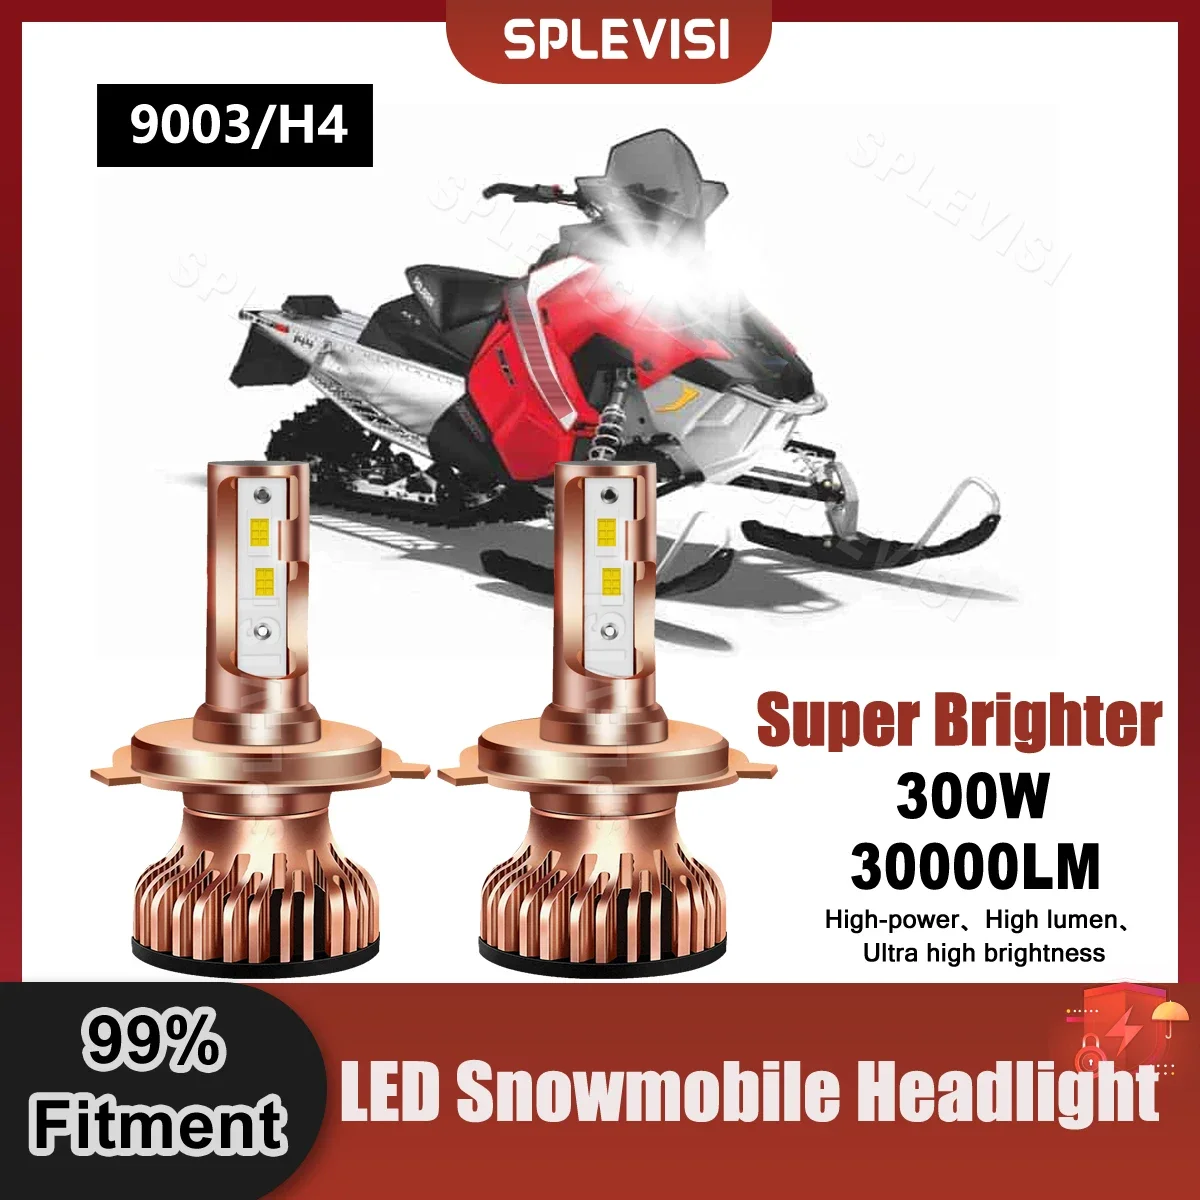 SPLEVISI LED Headlight Bulbs 6000K Pure White 300W For Polaris Switch Back 800 2009 2010 2011 2012 2013 2014 Motorcycle Bulbs headlight steering switch for chery a1 kimo j1 wiper switch combination switch